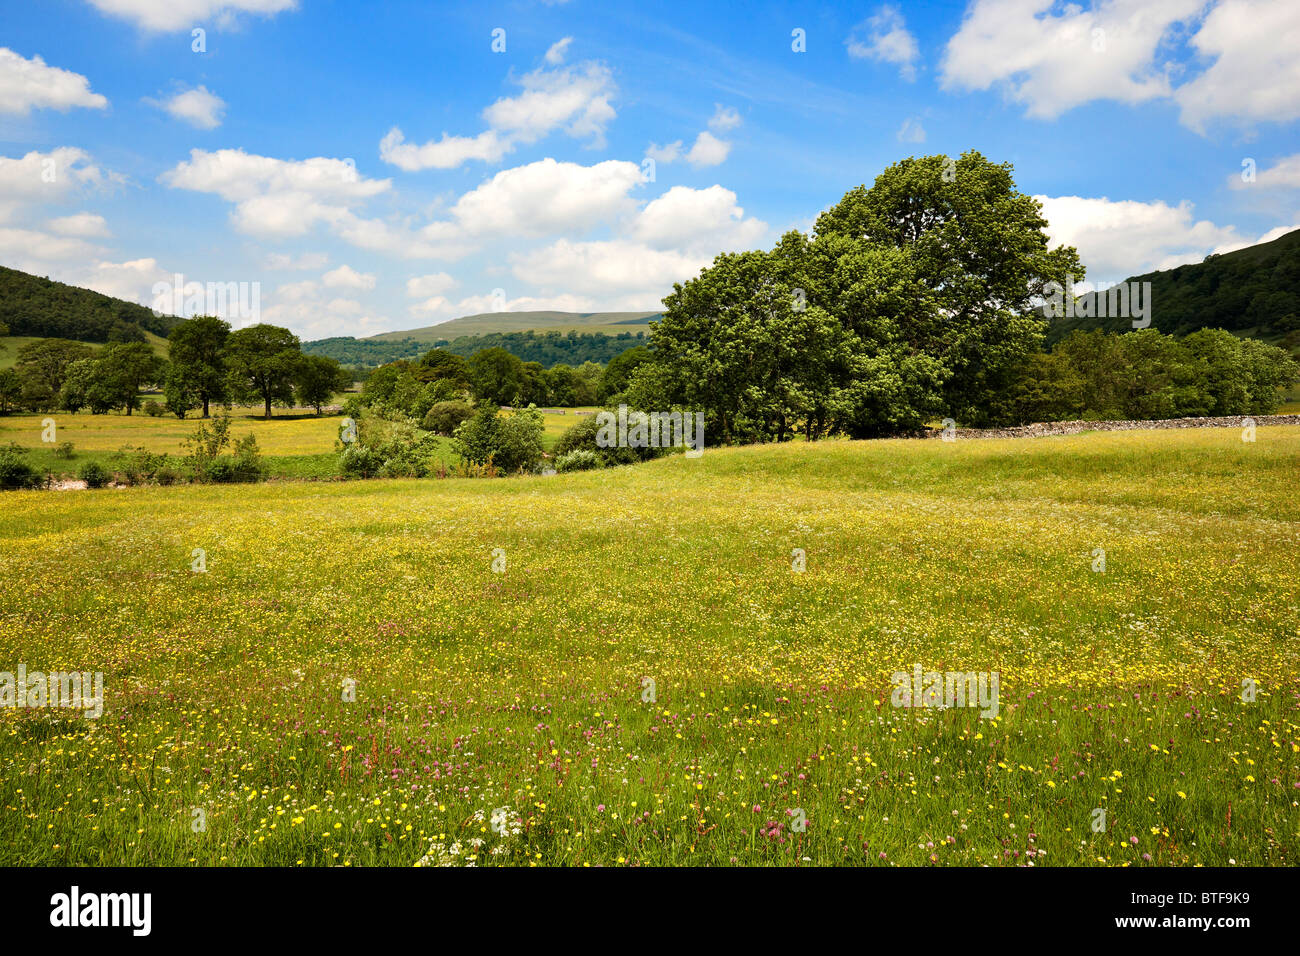 June in Upper Wharfedale, flower filled meadows near the village of Buckden, Yorkshire Dales UK. Stock Photo